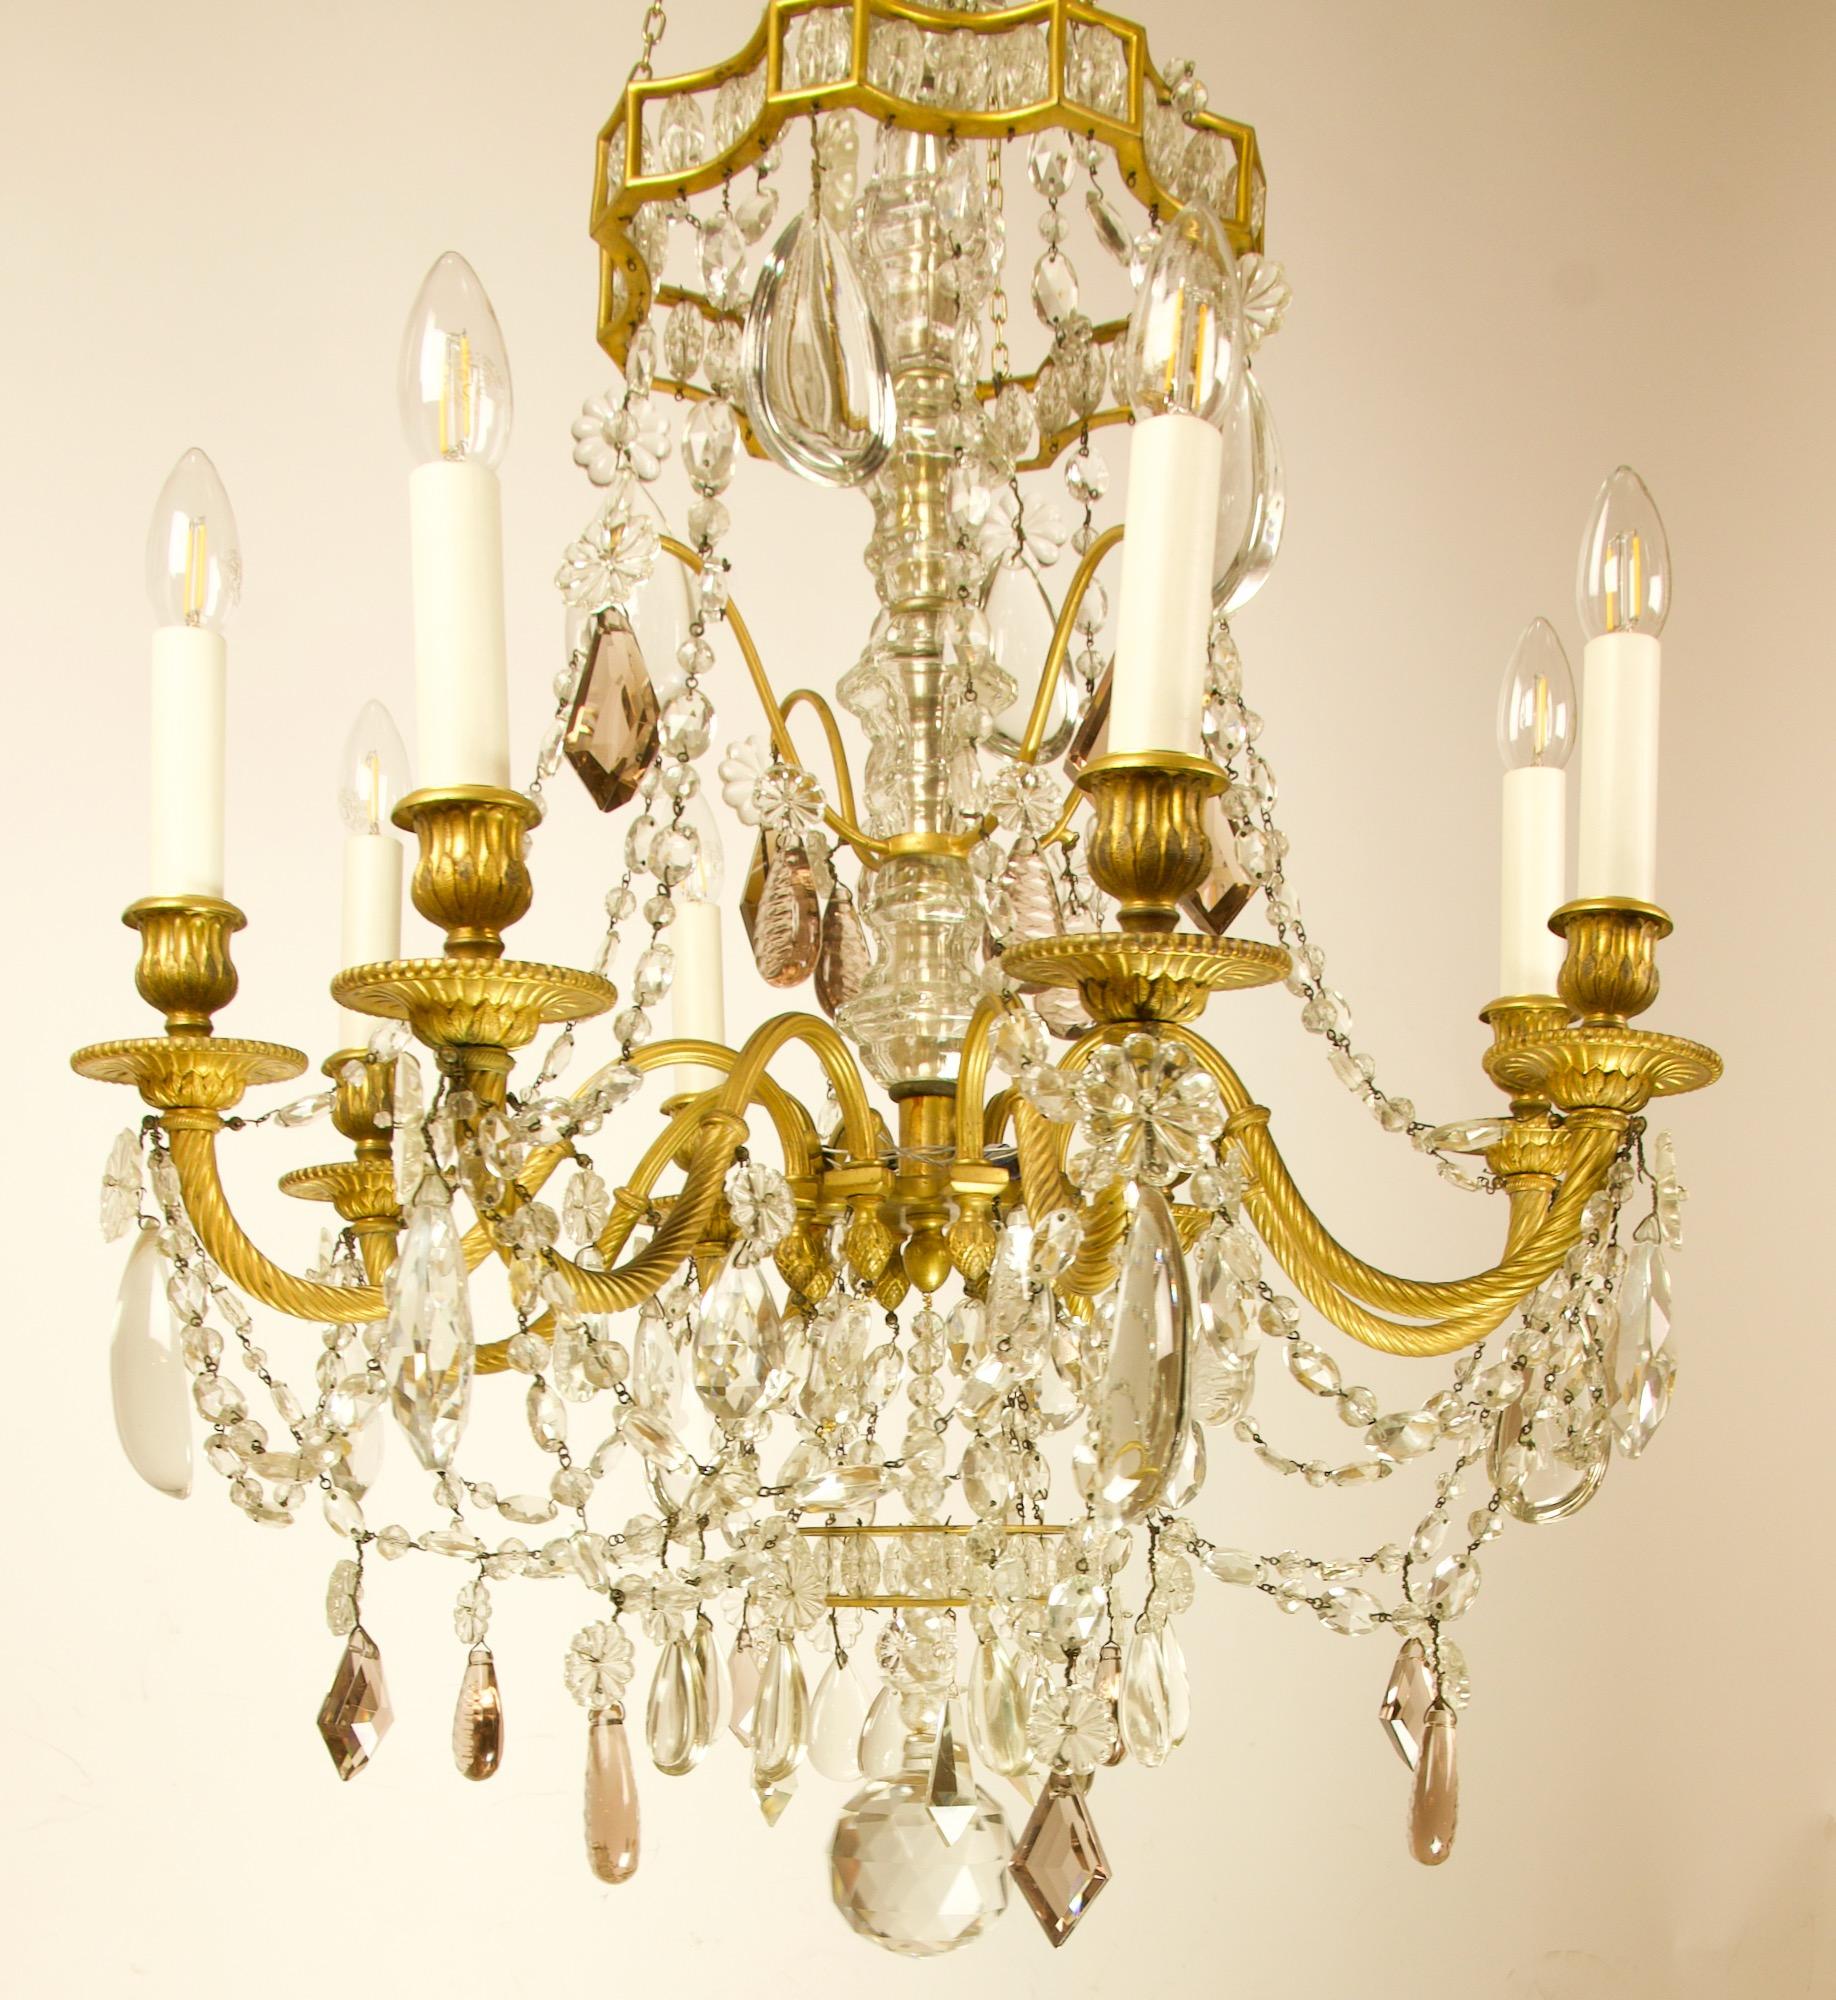 19th Century French Crystal-Cut and Gilt Bronze Louis XVI Chandelier Attr. to Maison Baguès